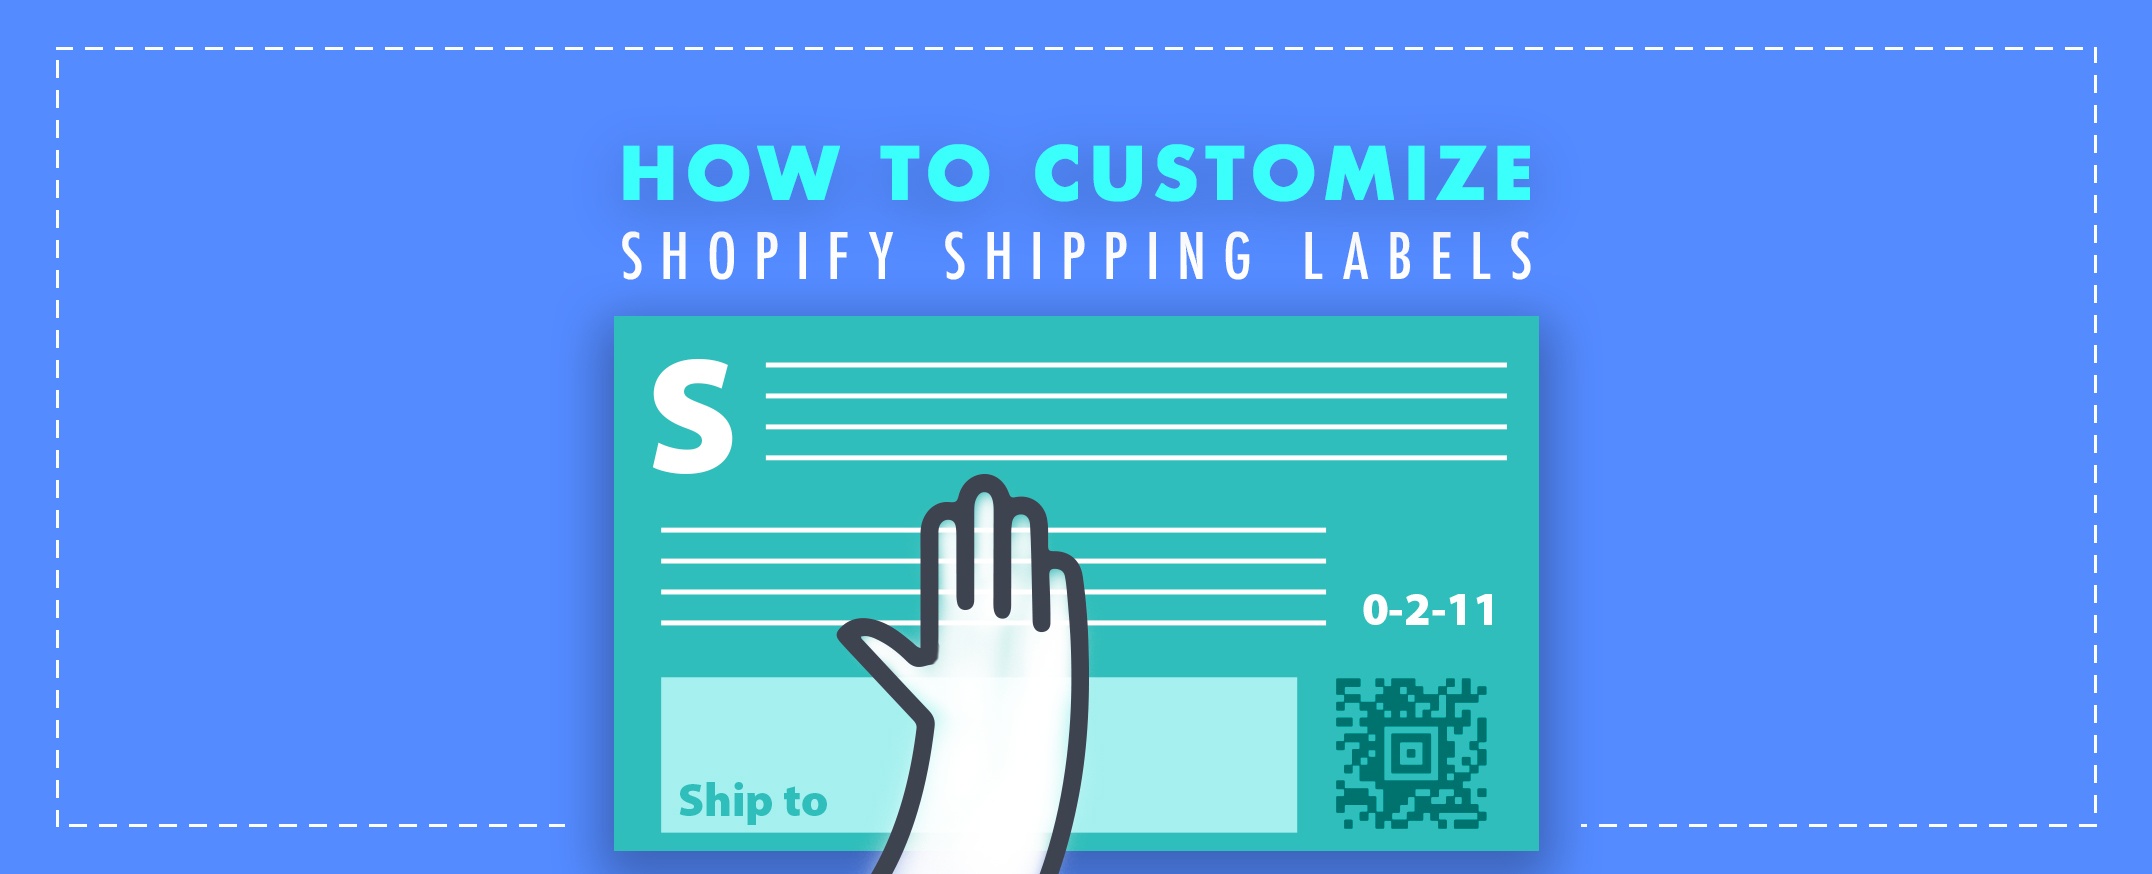 How To Customize Shopify Shipping Labels APPSeCONNECT